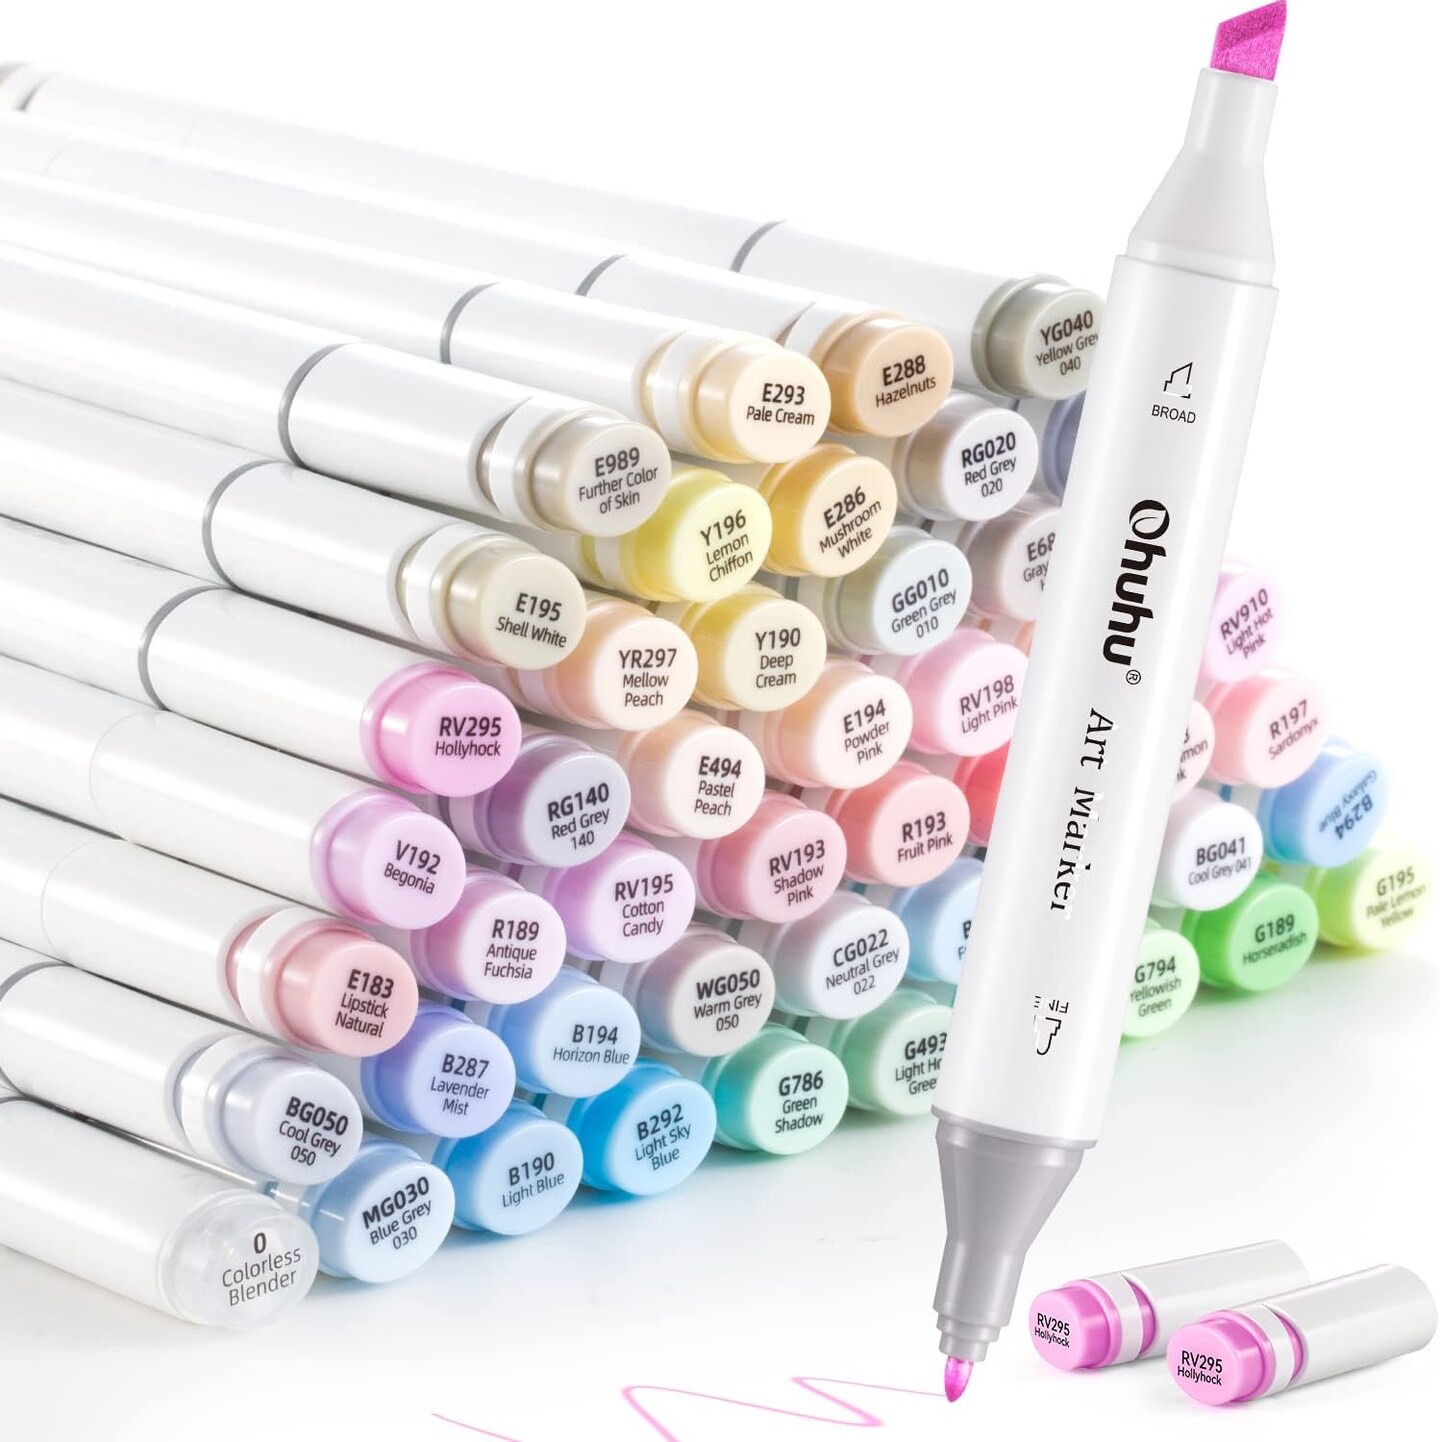 Alcohol-Based Markers Set, Double Tipped Fine&Chisel Art Marker